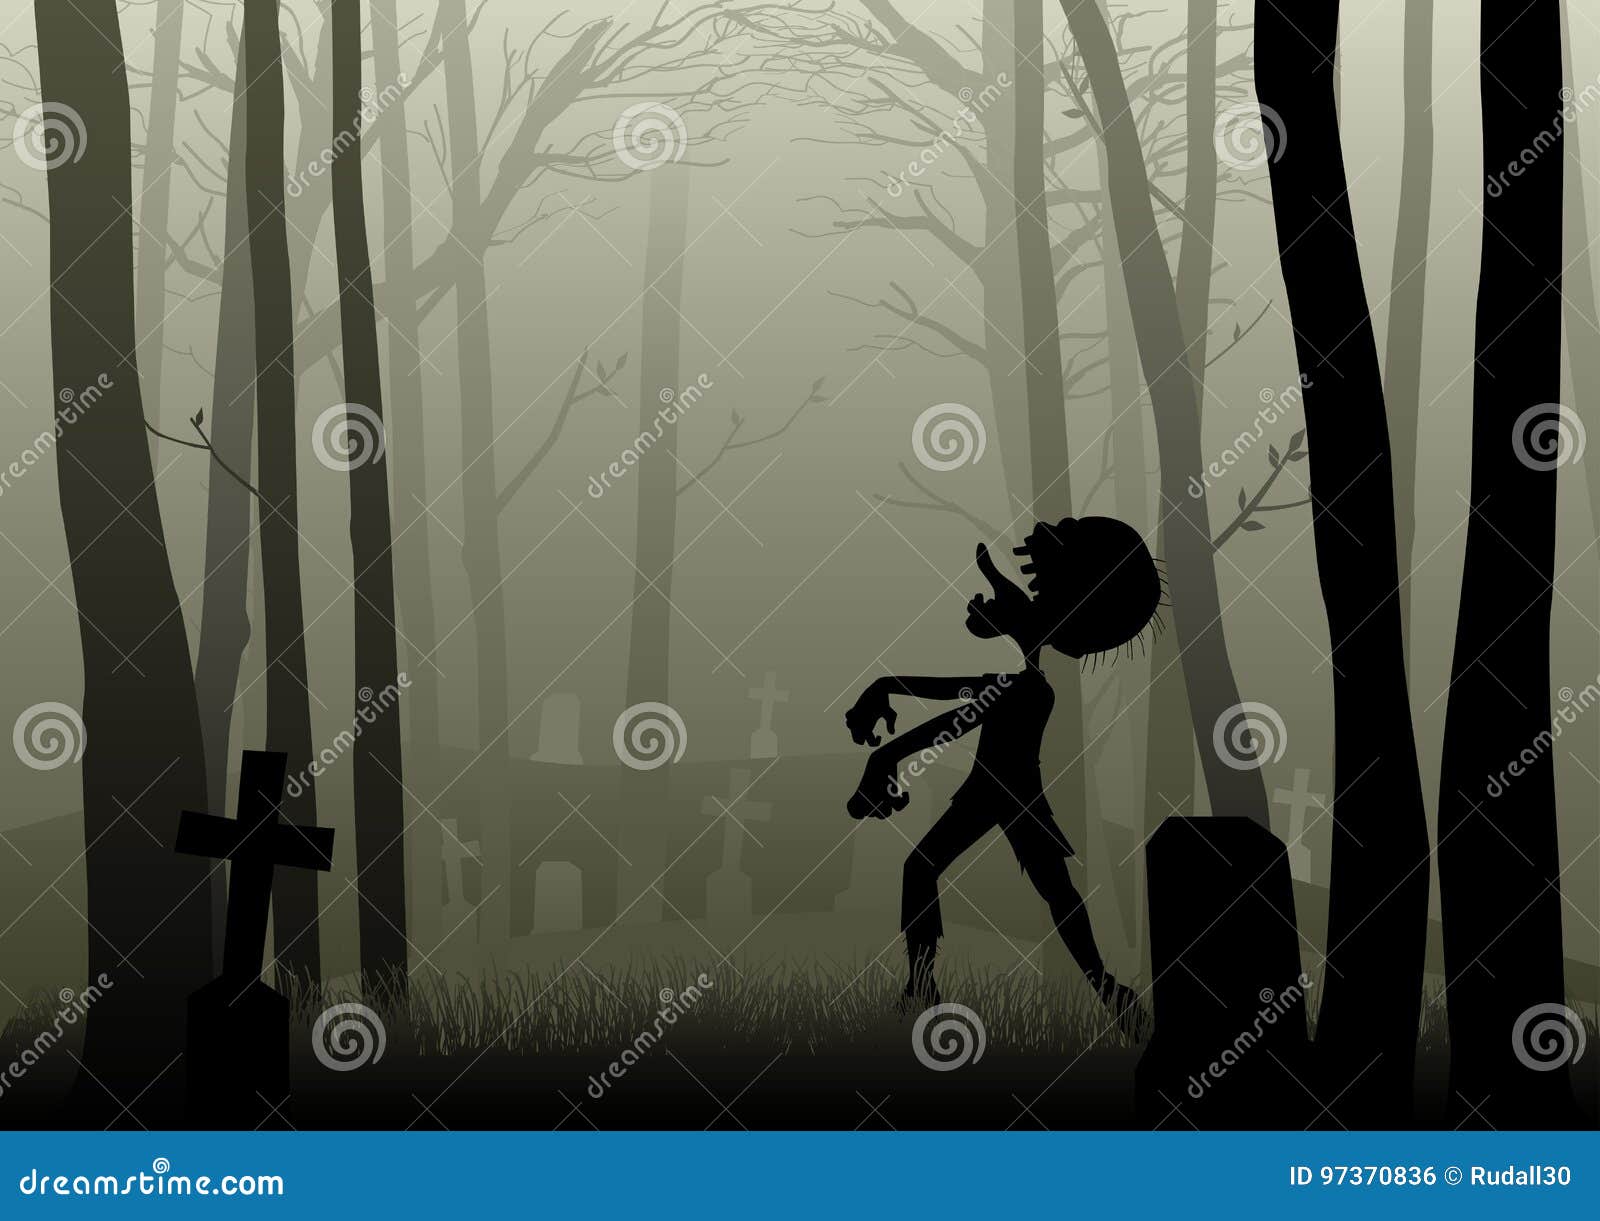 Zombie Walking In The Burnt Cemetery Royalty-Free Illustration